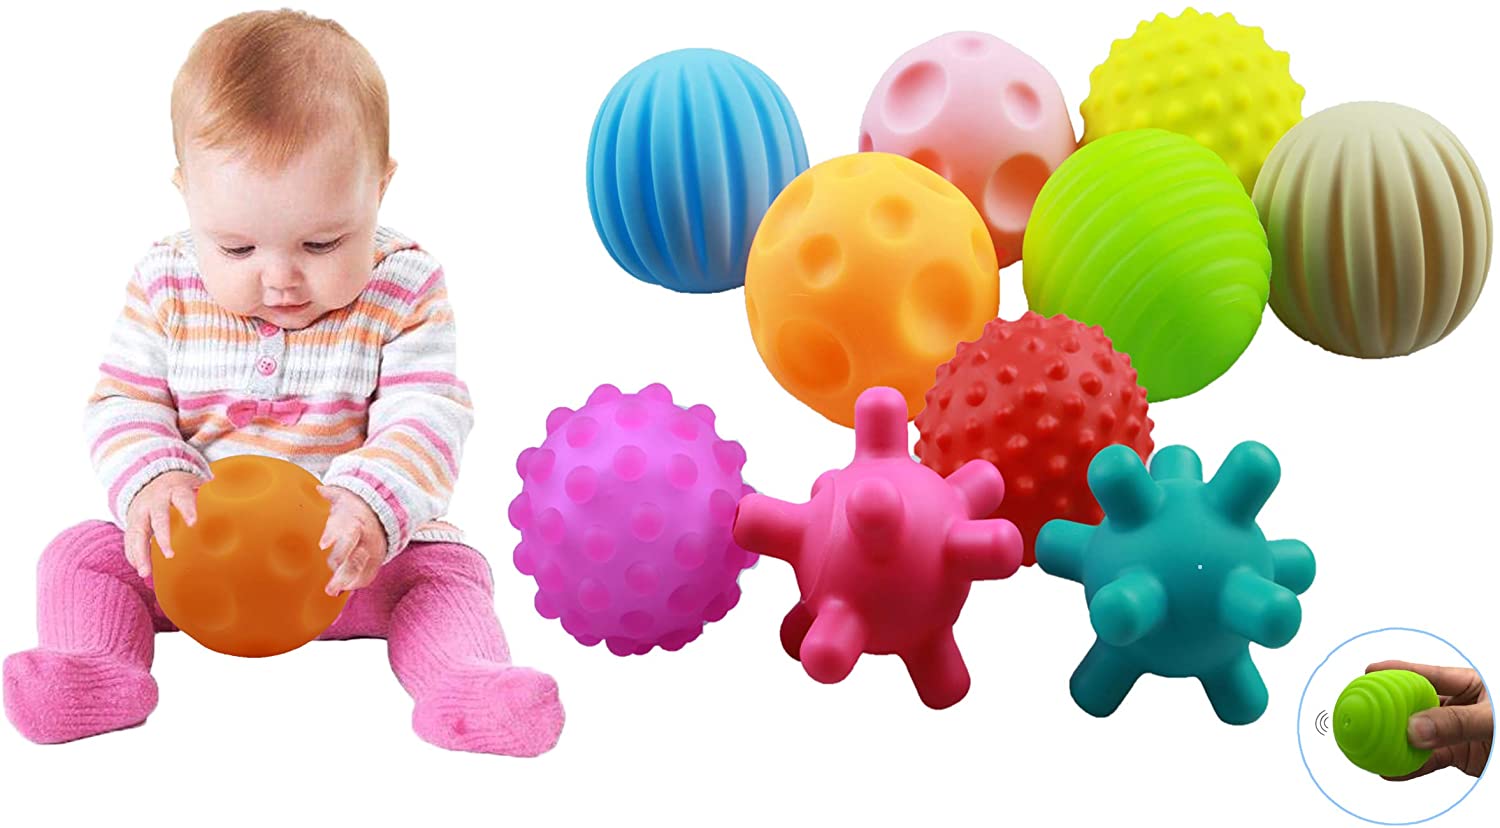 Textured Sensory Balls for Toddlers，Baby Sensory Toy Set for Stress Relief，Sensory Engagement & Early Education for Ages 6 Months and up（6 Pack） 